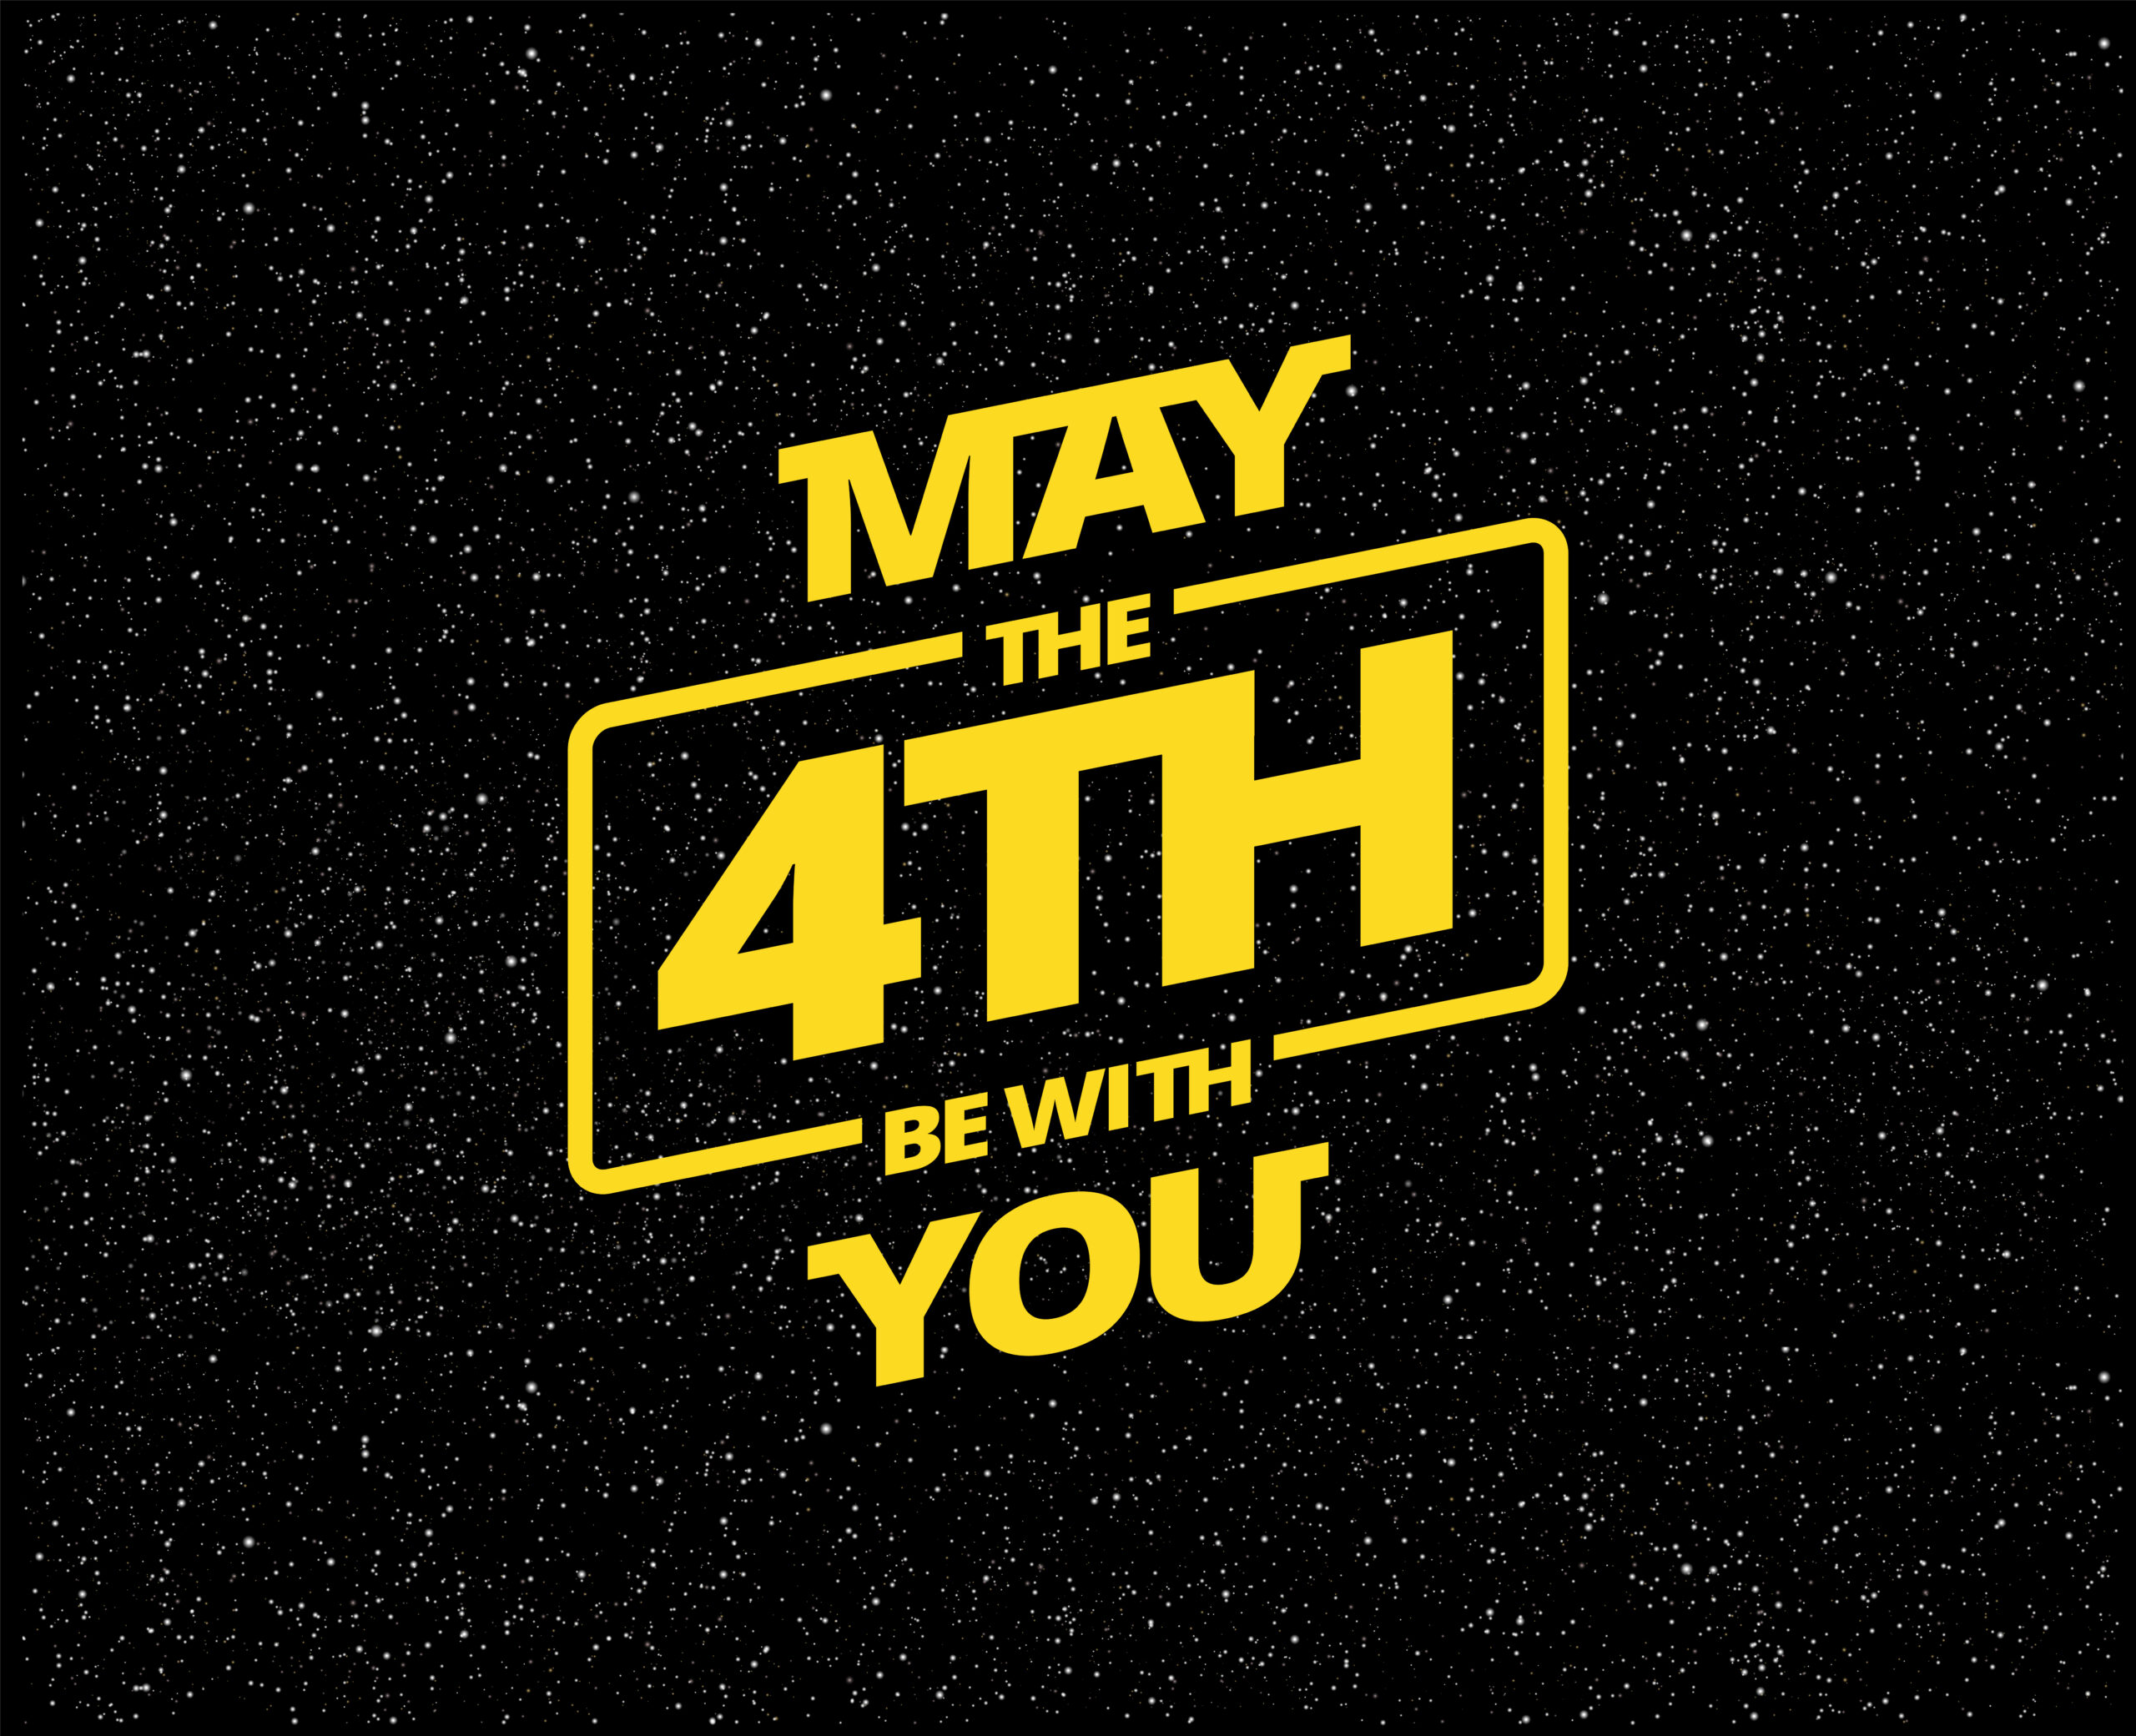 Geek insider, geekinsider, geekinsider. Com,, may the 4th be with you, always, entertainment